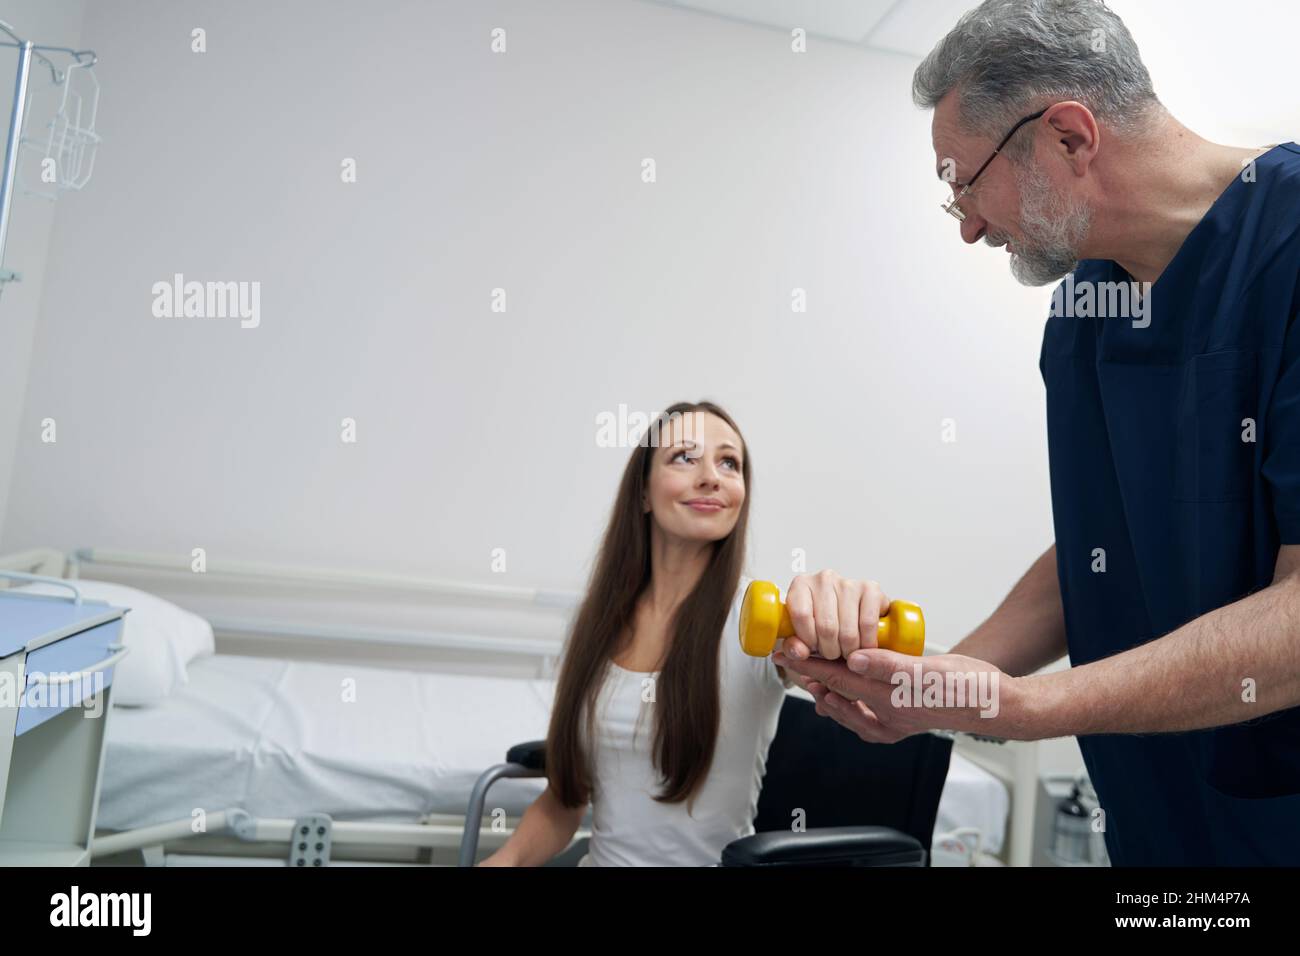 Woman with disability lifting one dumbbell supported by kinesiologist Stock Photo